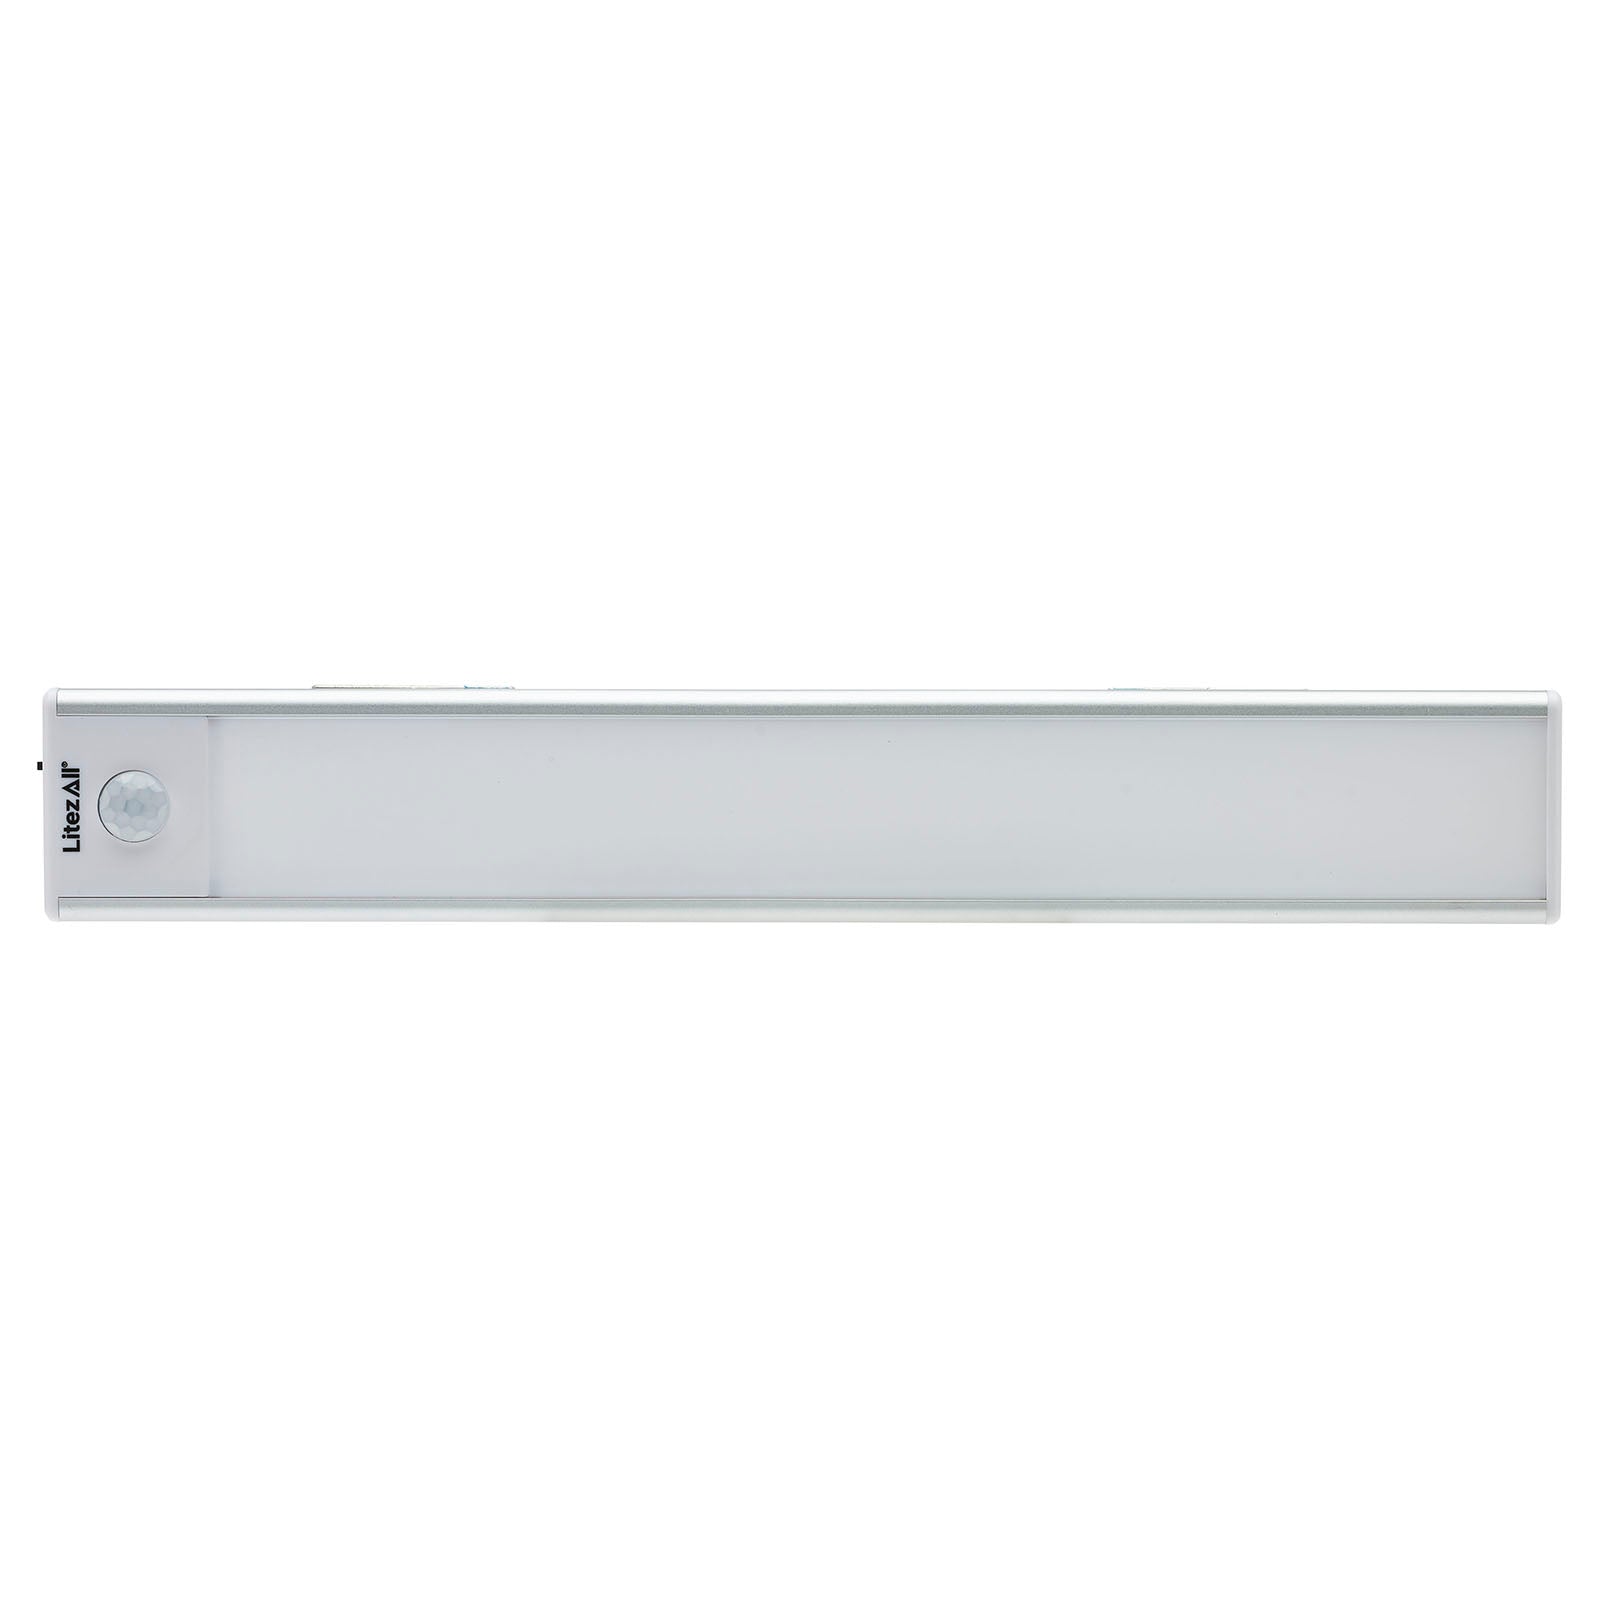 LitezAll Rechargeable Motion Activated Light Bar - LitezAll - Wireless Lighting Solutions - 1